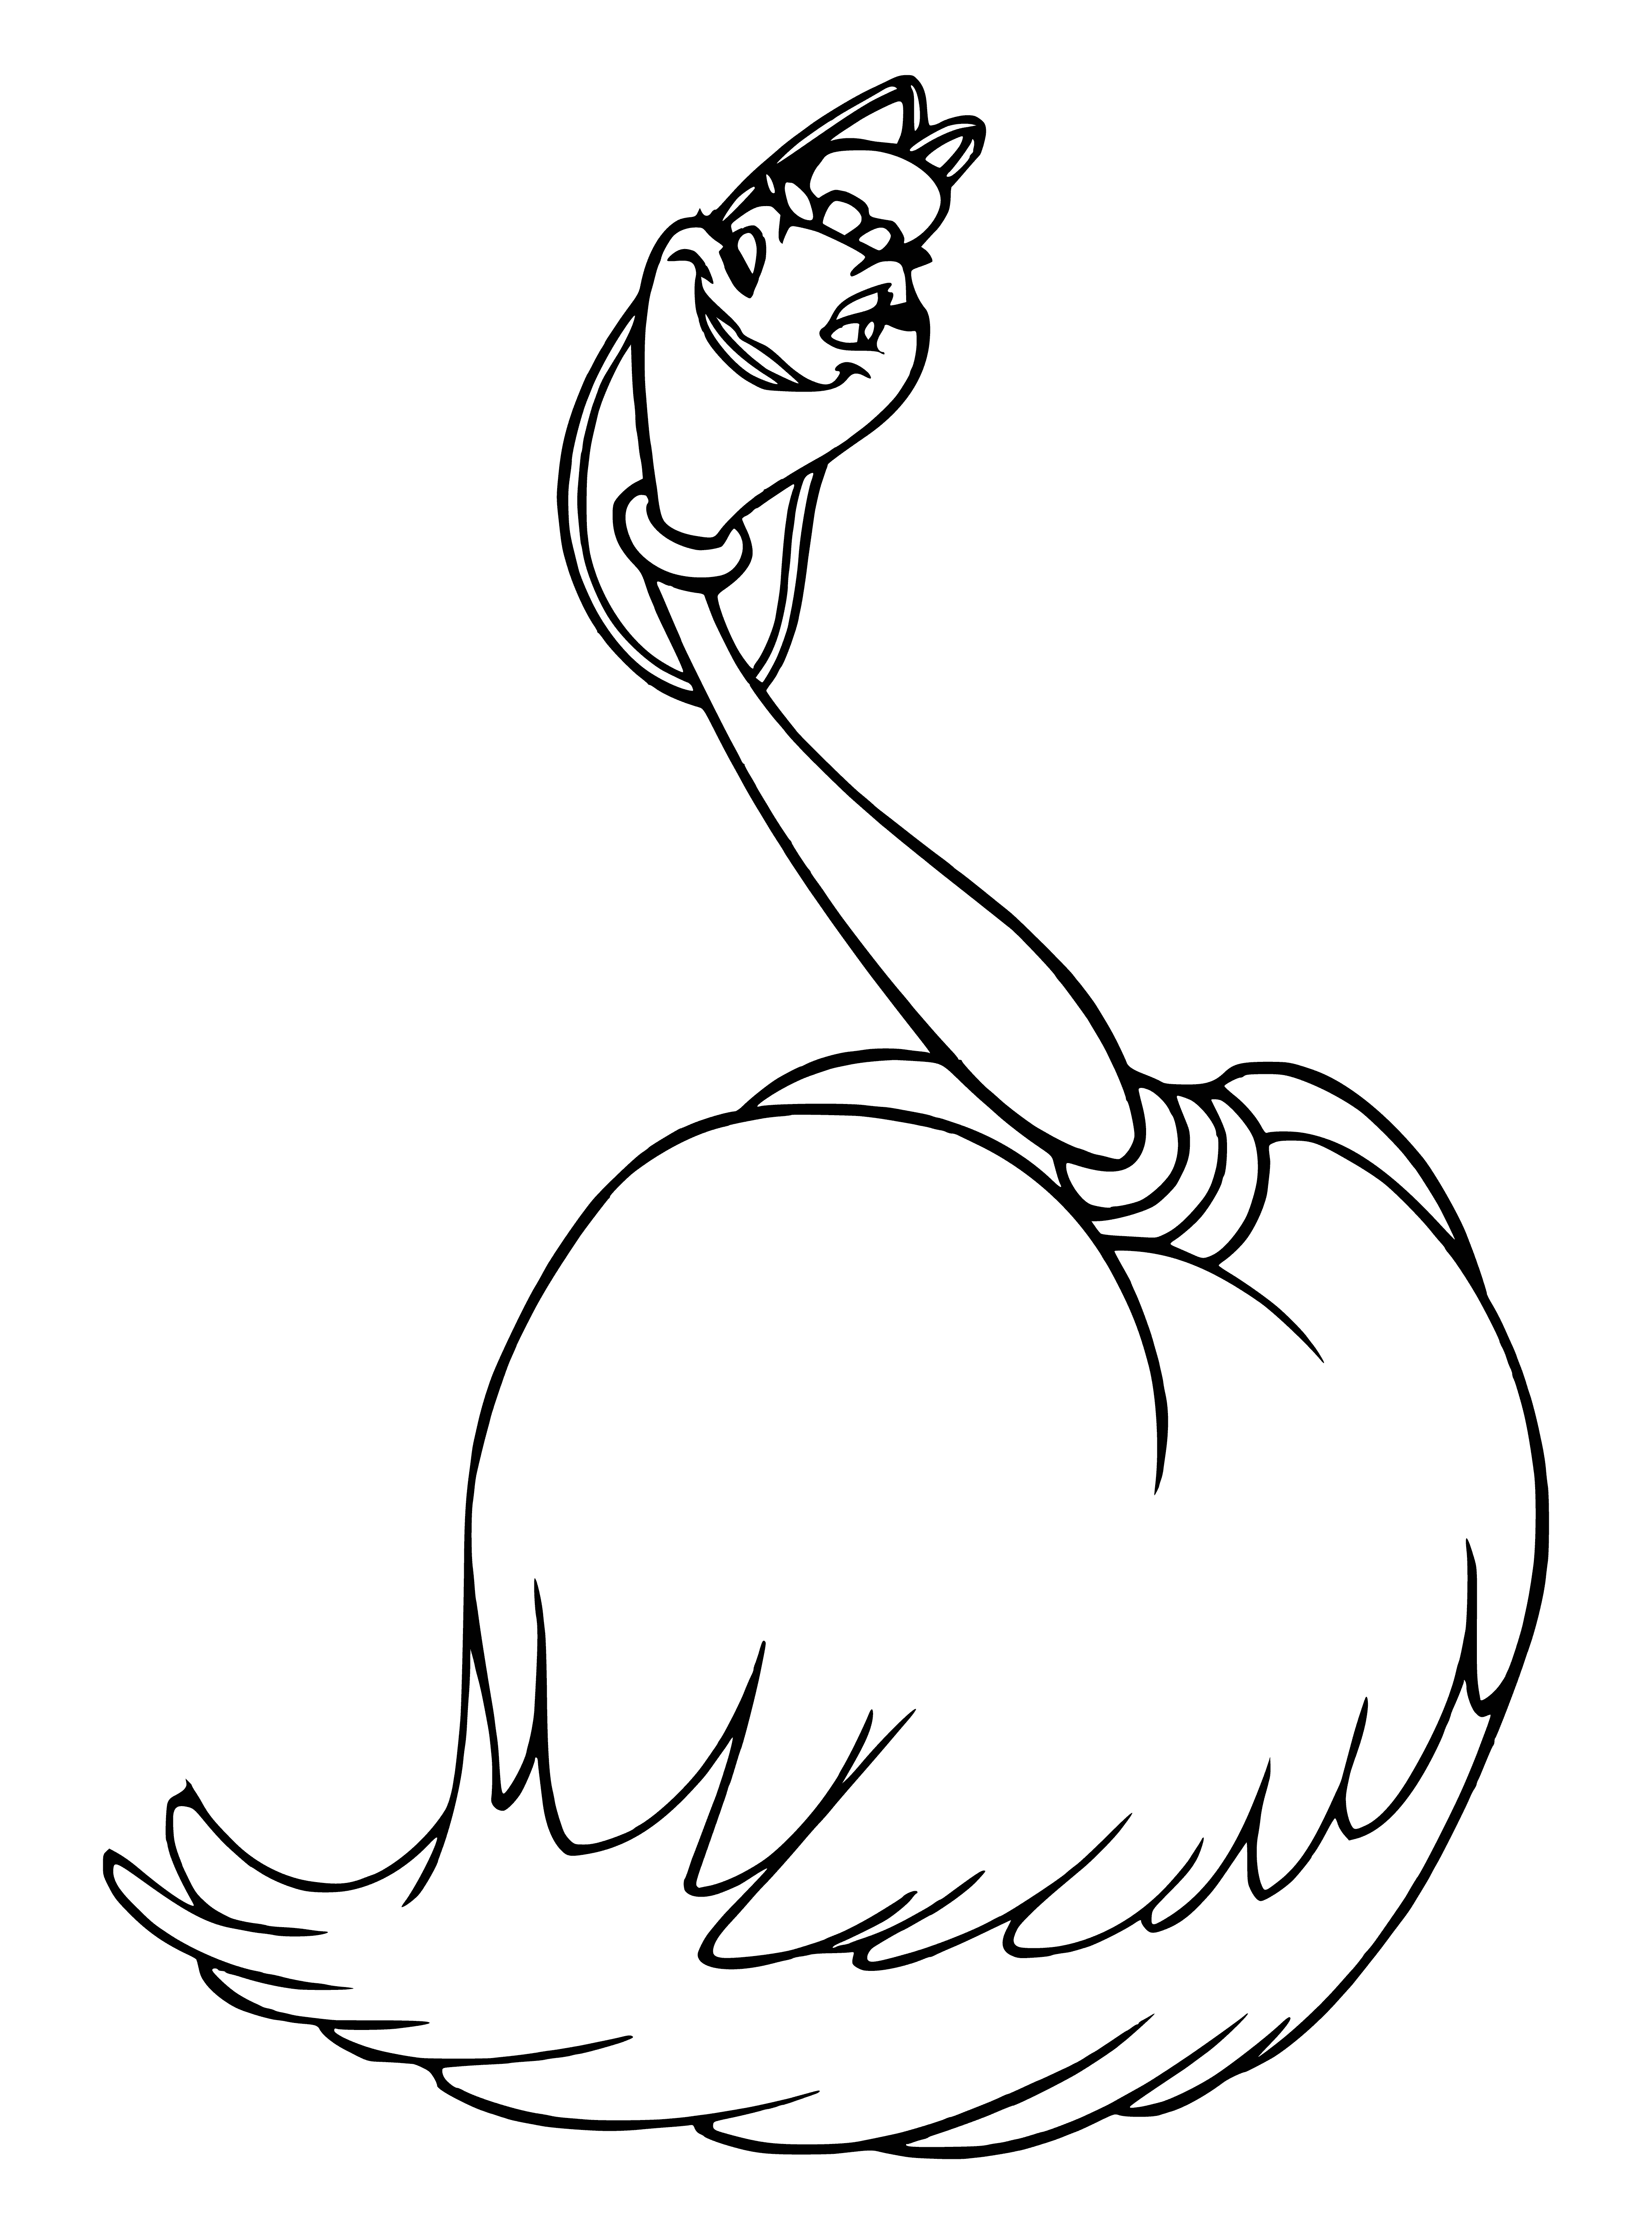 coloring page: Fifi is a graceful maid, and loves nothing more than helping others - going above & beyond to make sure everyone is smiling.